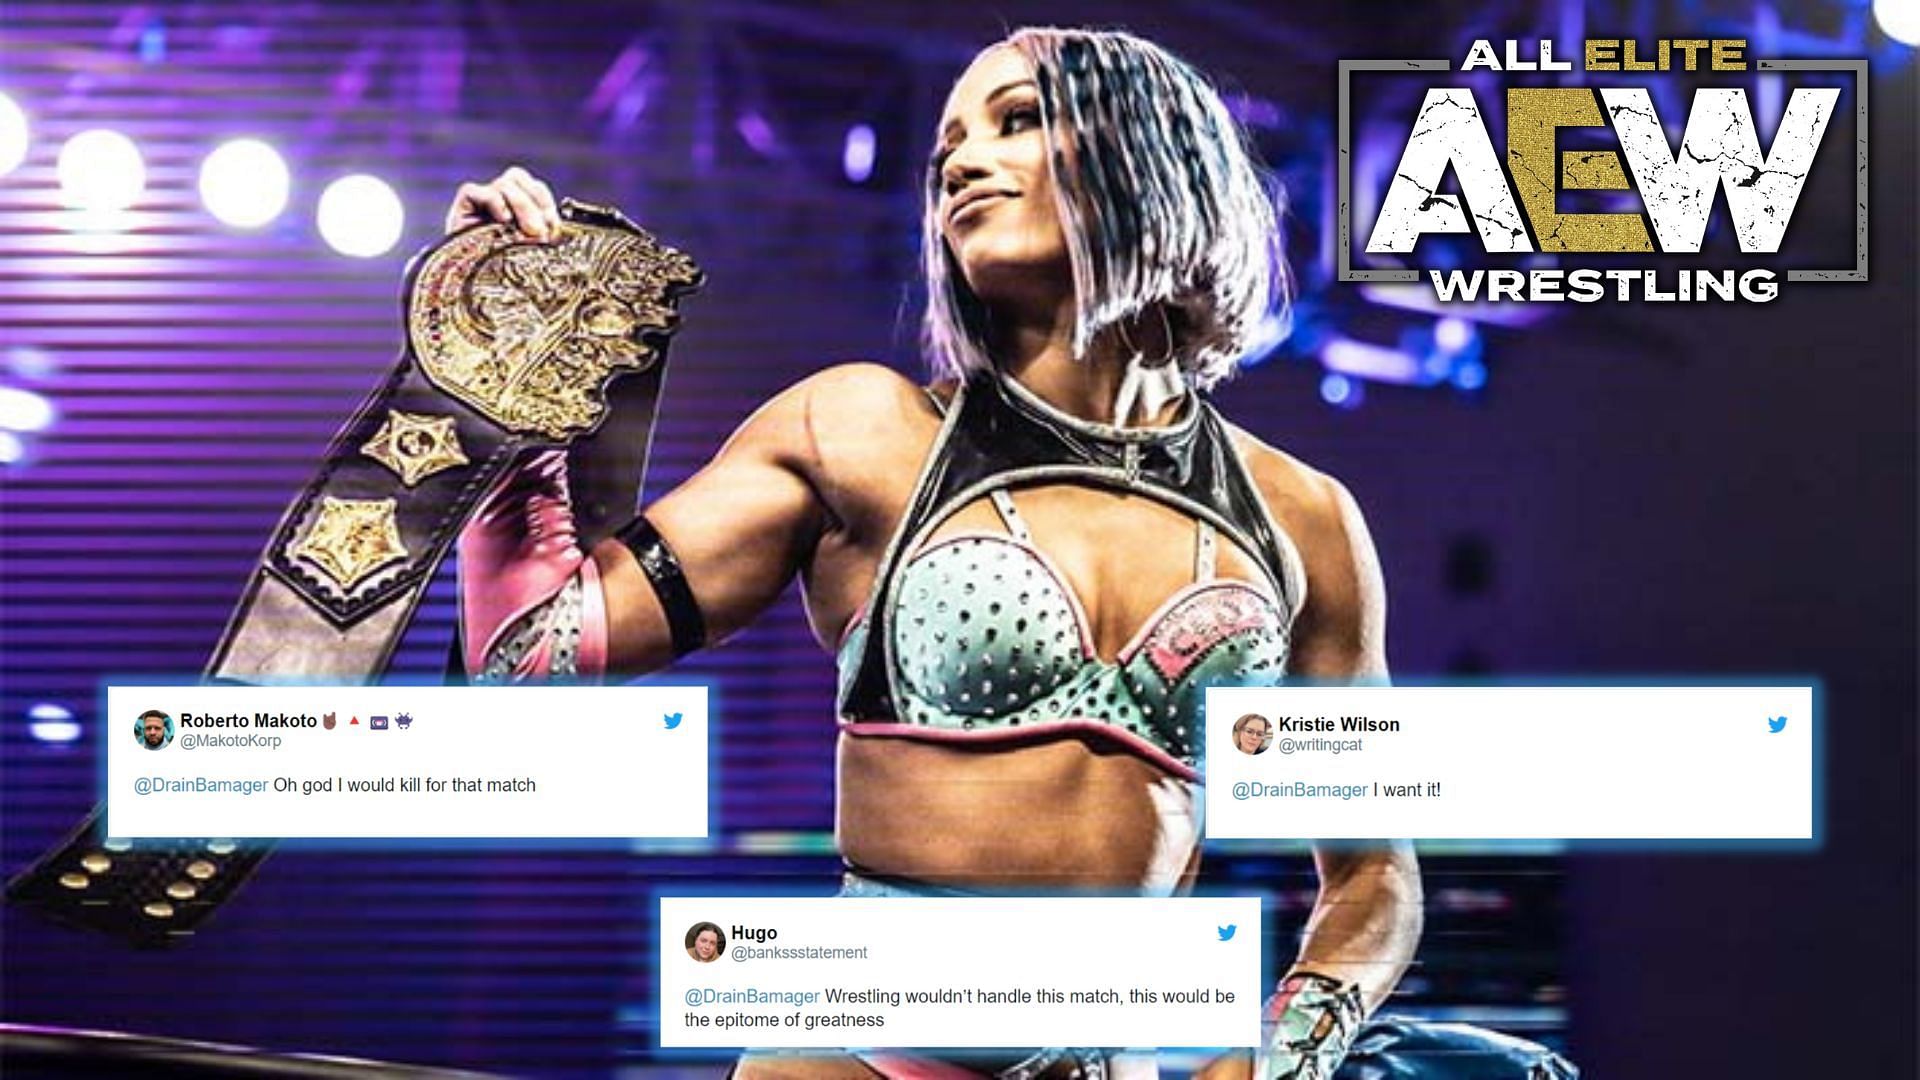 Will Mercedes Mone face an AEW star in the future?